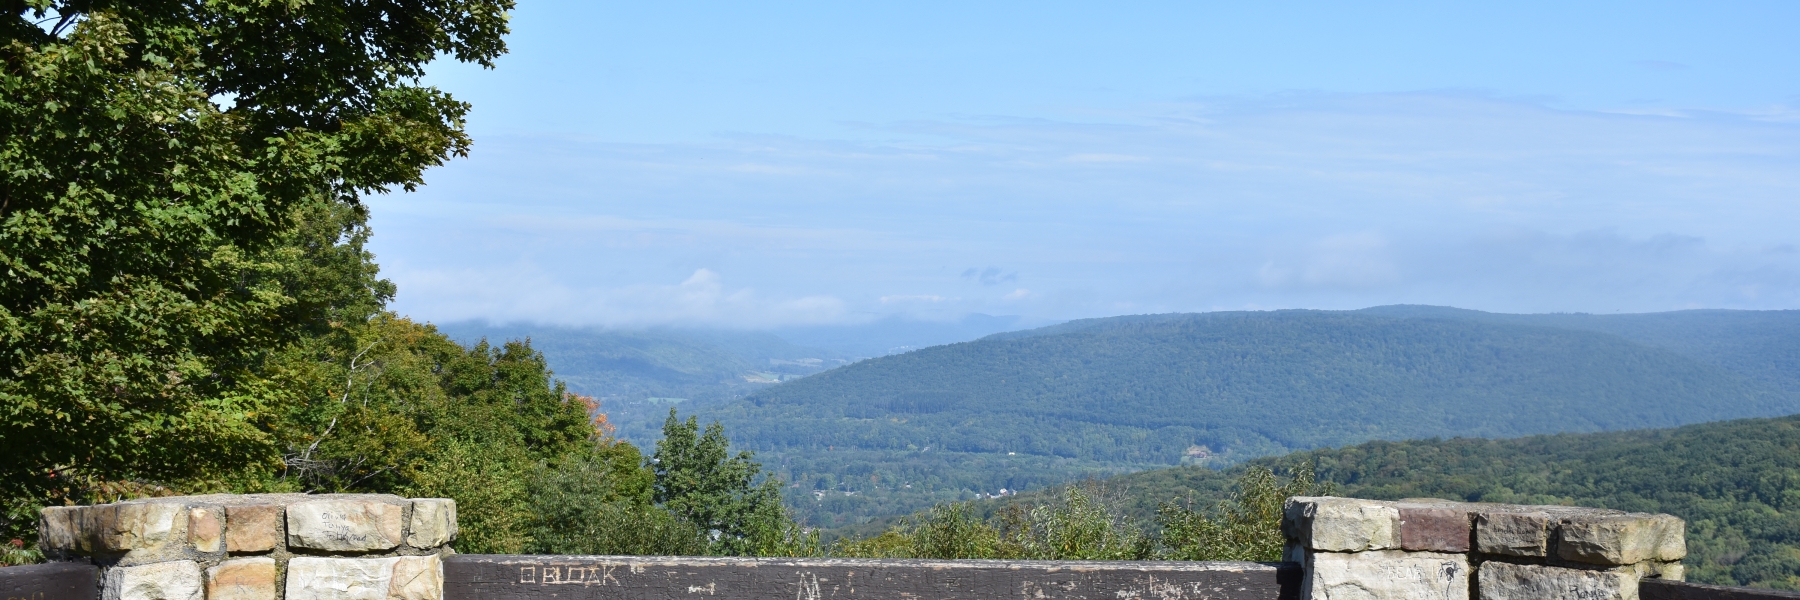 A view of part of Salamanca, NY from Stone Tower at Allegany State Park